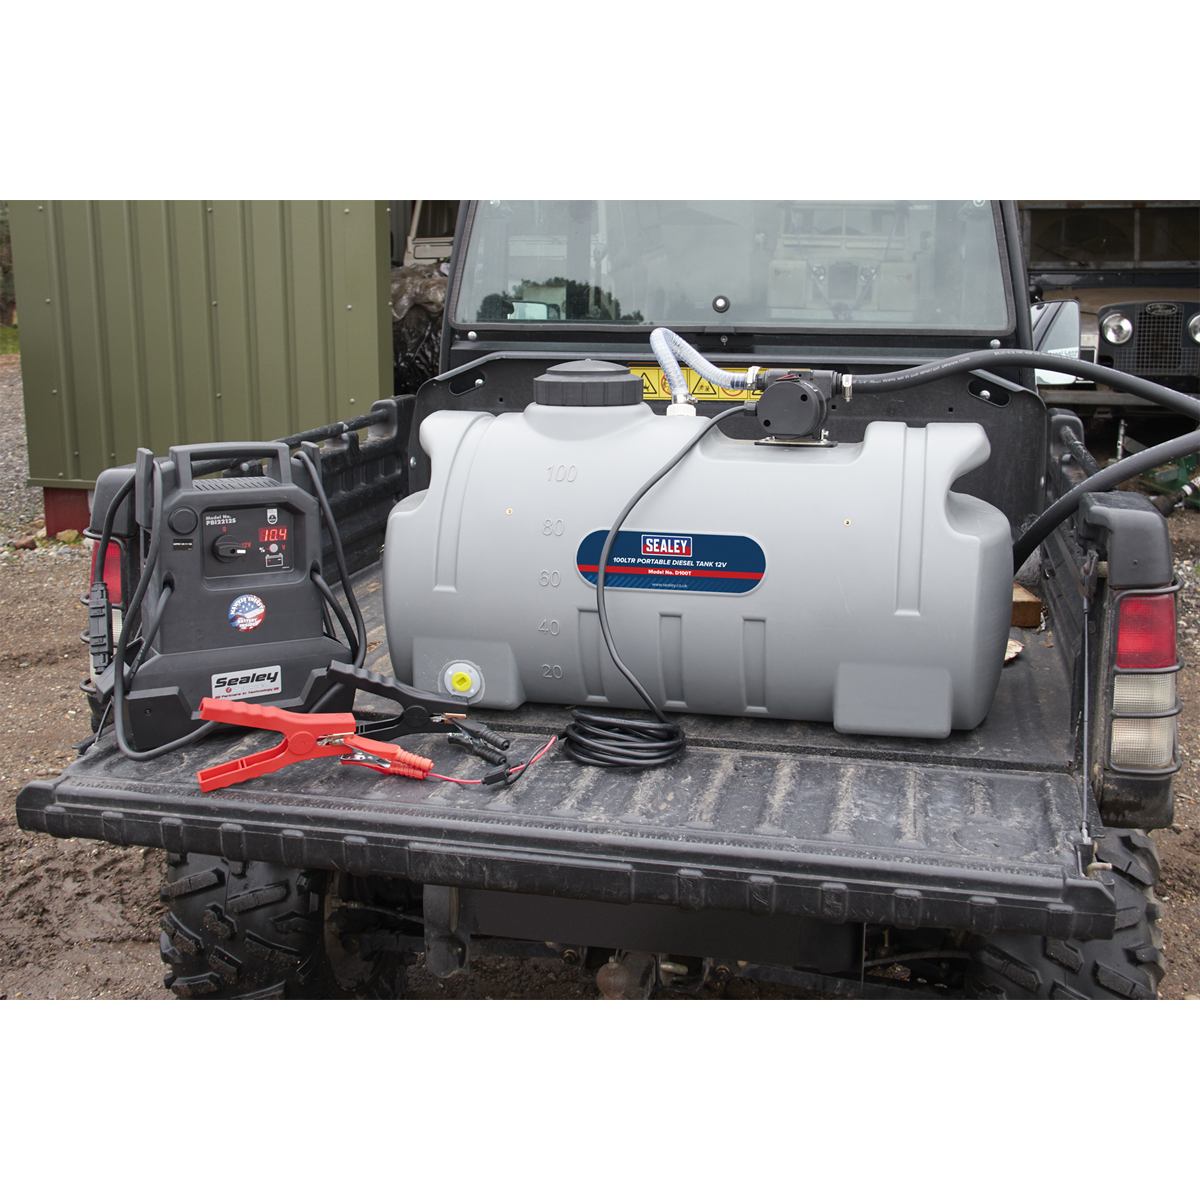 Easy to secure the tank to your pick up struck or van D100T